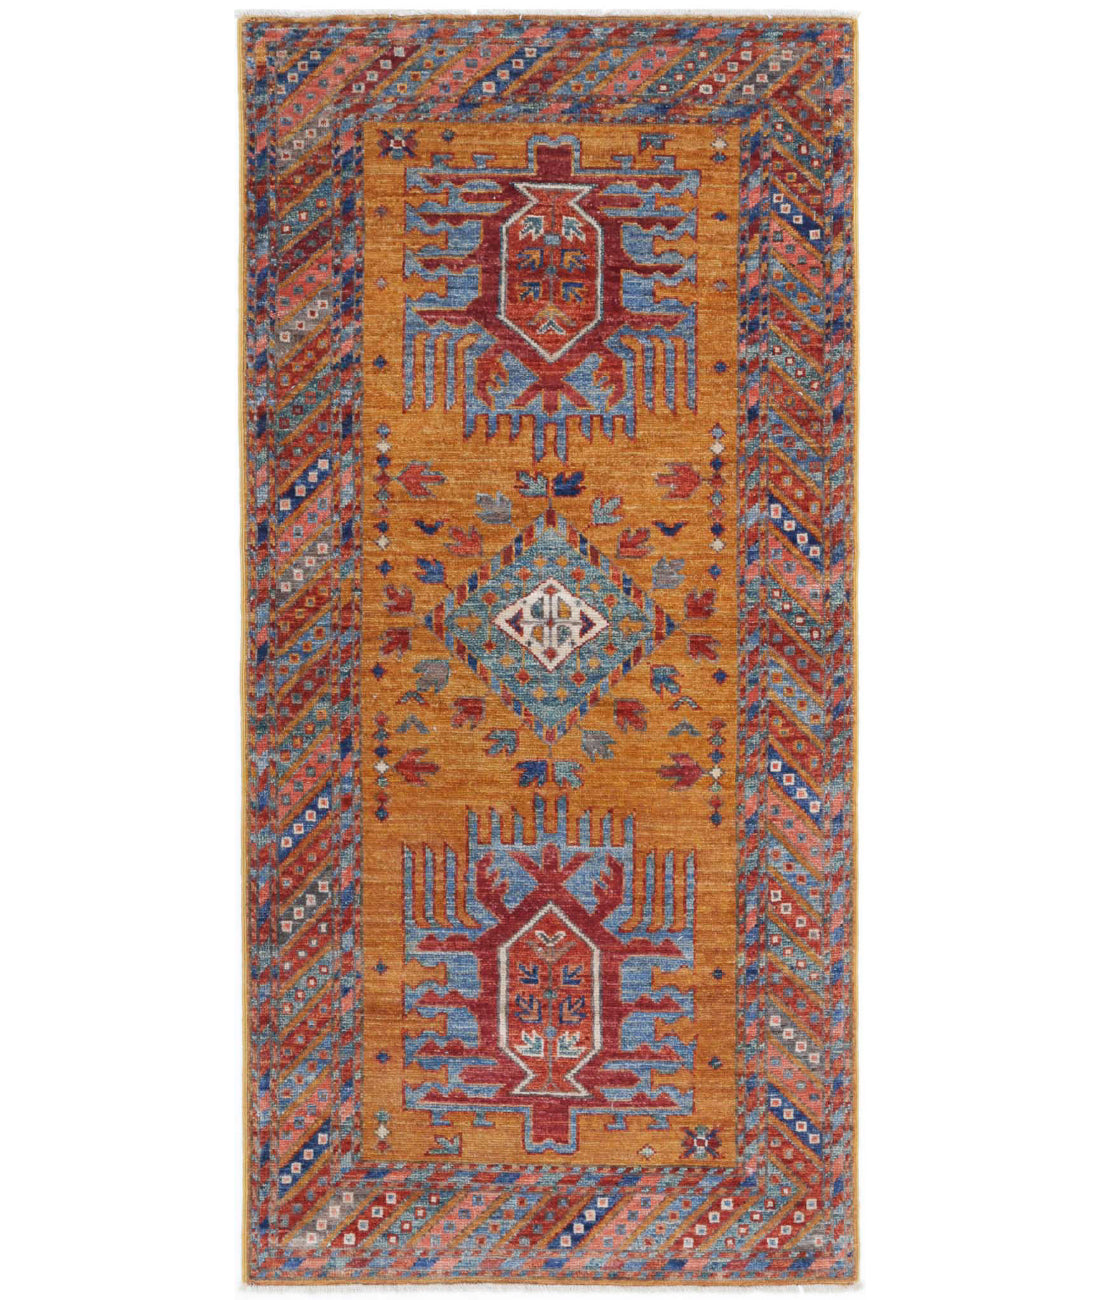 Hand Knotted Nomadic Caucasian Humna Wool Rug - 2&#39;8&#39;&#39; x 5&#39;9&#39;&#39; 2&#39;8&#39;&#39; x 5&#39;9&#39;&#39; (80 X 173) / Gold / Multi